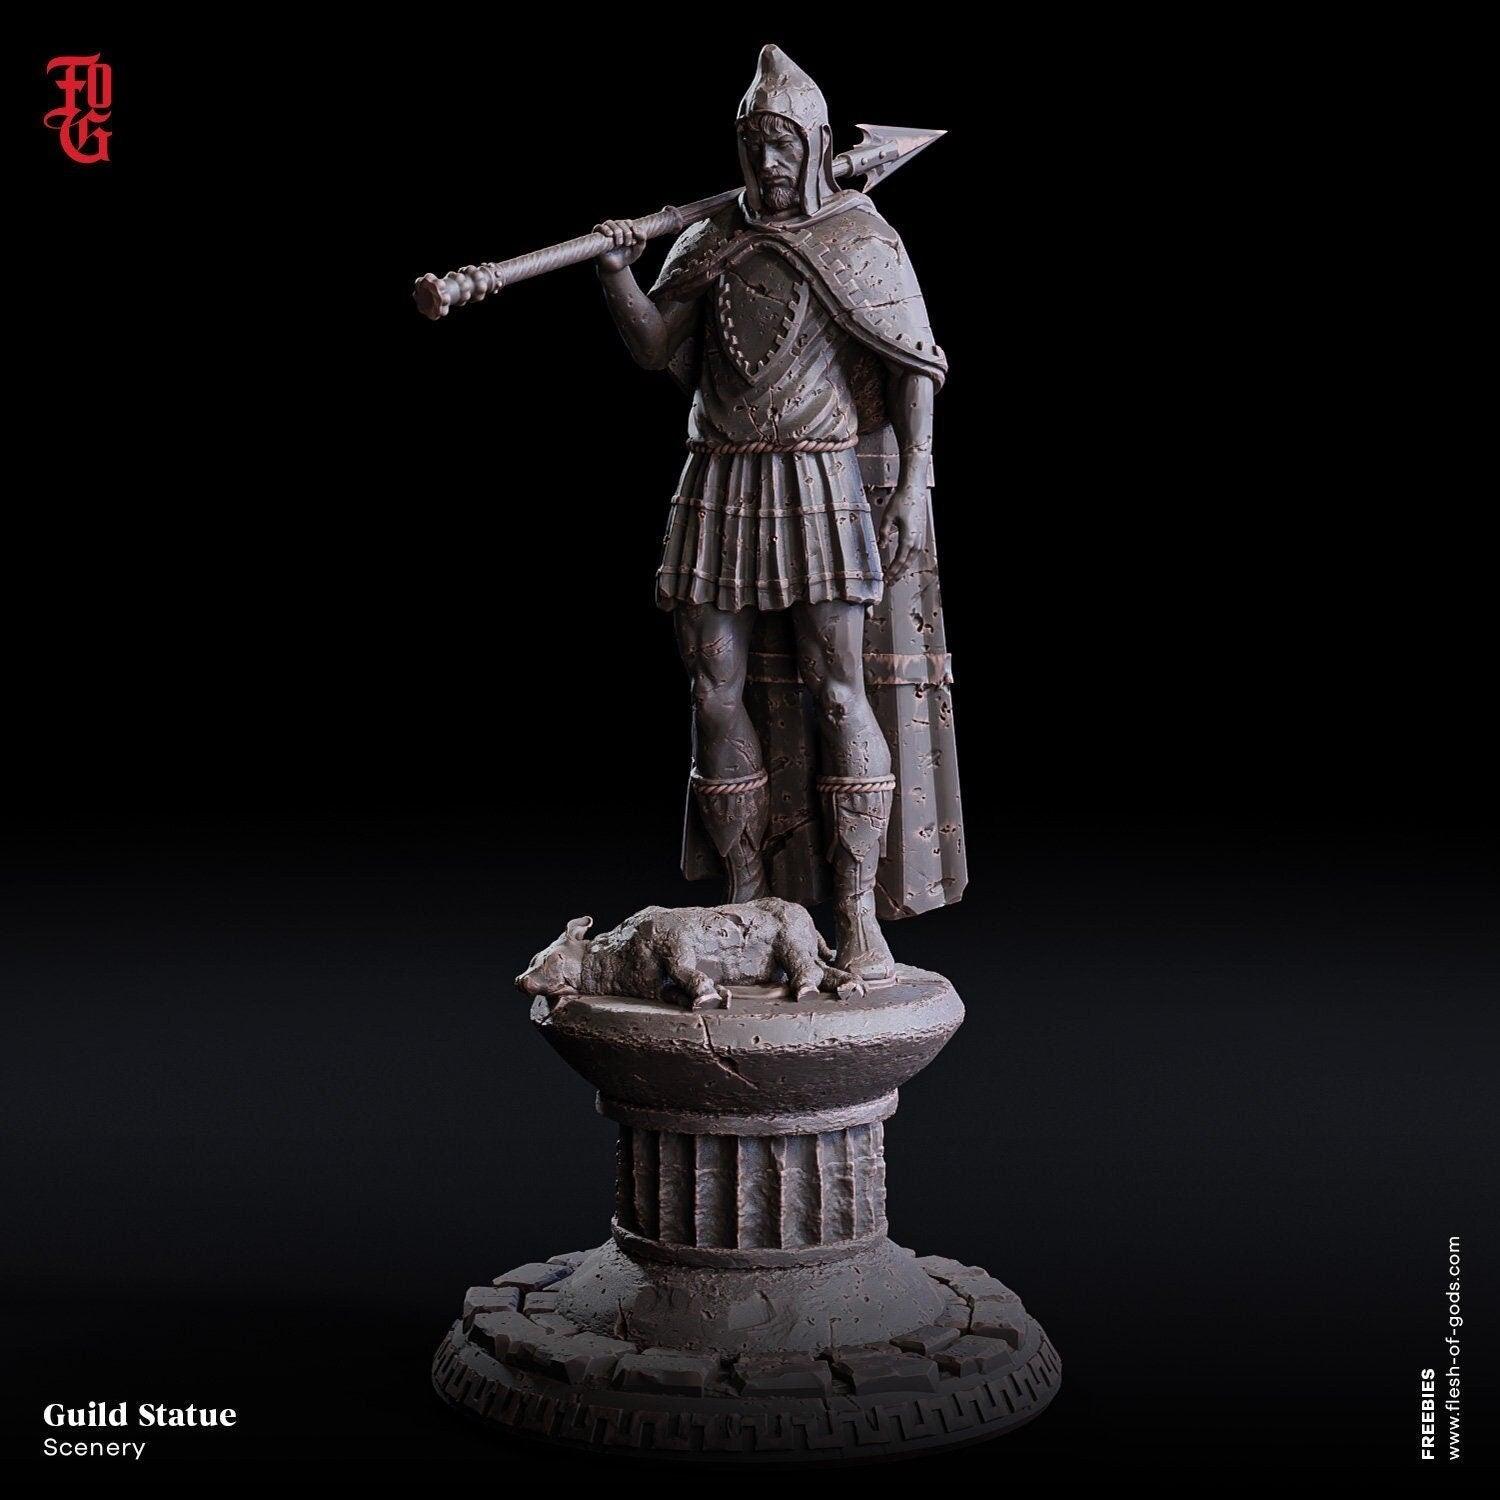 Guild Monument Miniature | Terrain for Dungeons and Dragons | 50mm Base - Plague Miniatures